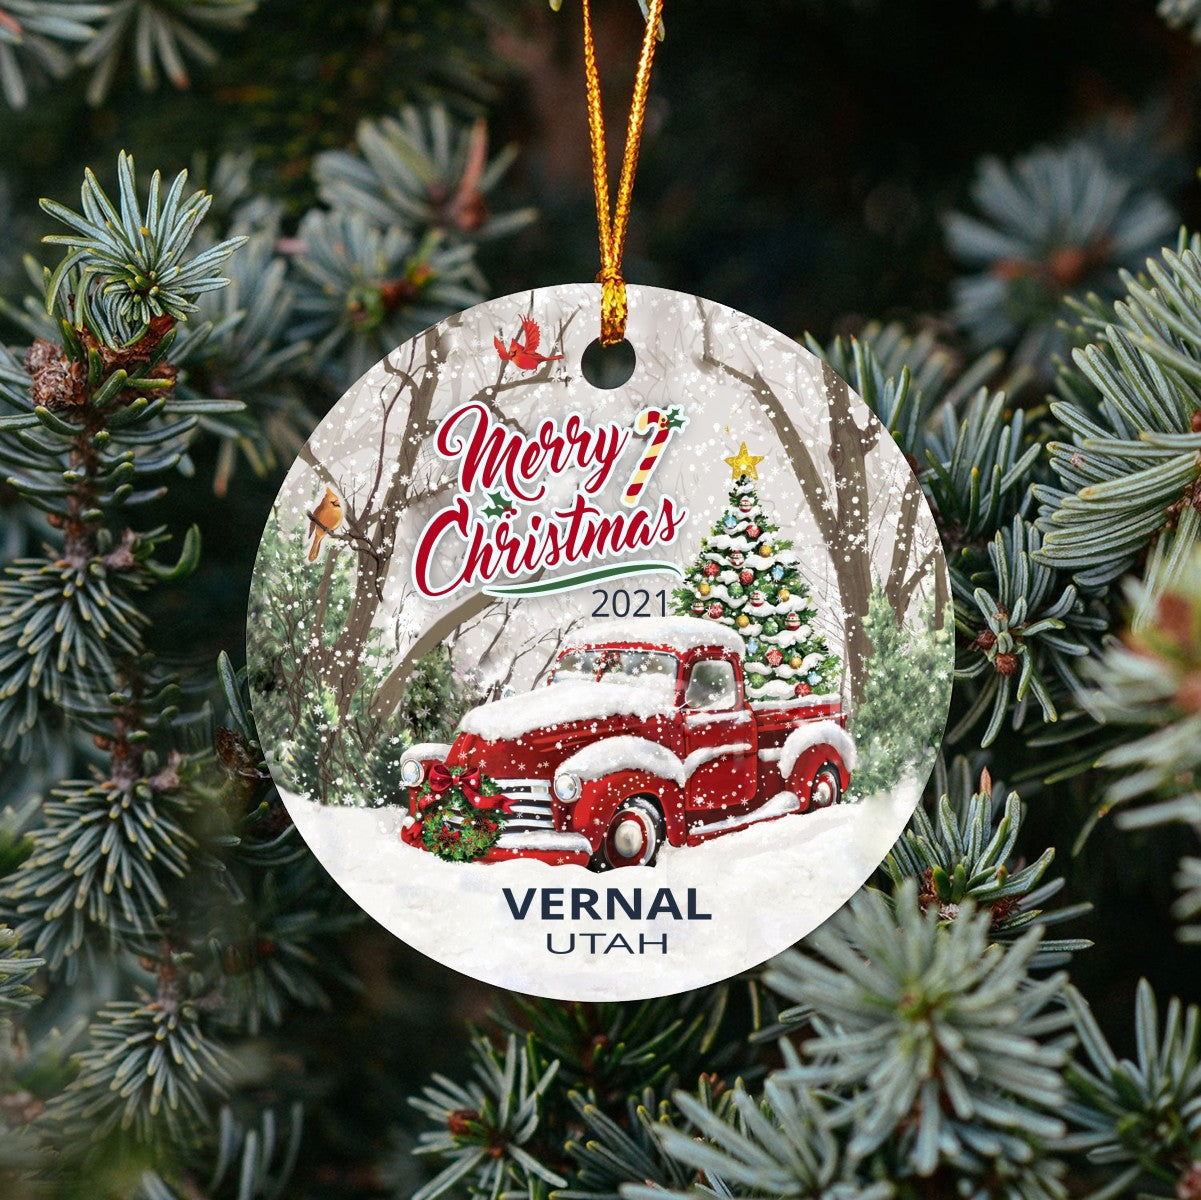 Christmas Tree Ornaments Vernal - Ornament Customize With Name City And State Vernal Utah UT - Red Truck Xmas Ornaments 3'' Plastic Gift For Family, Friend And Housewarming